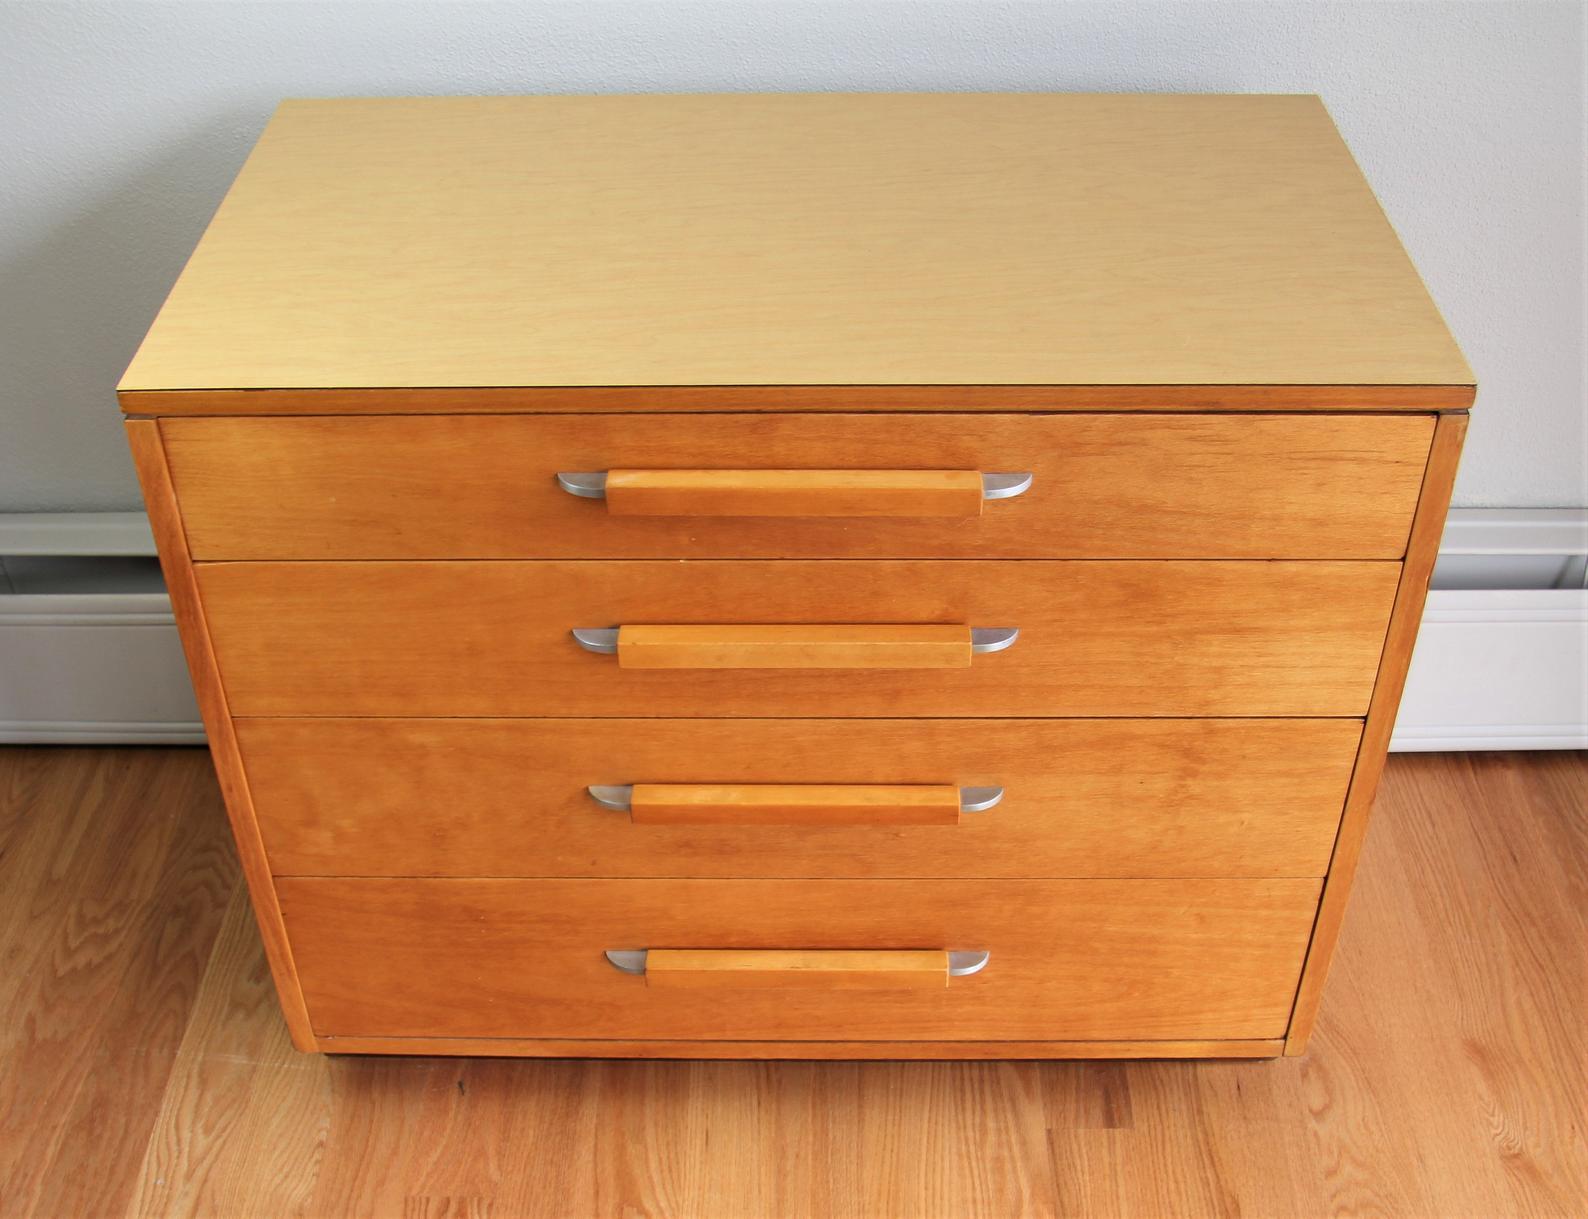 Eliel Saarinen short four drawer dresser for Johnson Furniture Co. The design is from the FHA (Flexible Home Arrangement) a modular collection by Eliel Saarinen. However, these pieces are by John Stuart, perhaps in collaboration with the